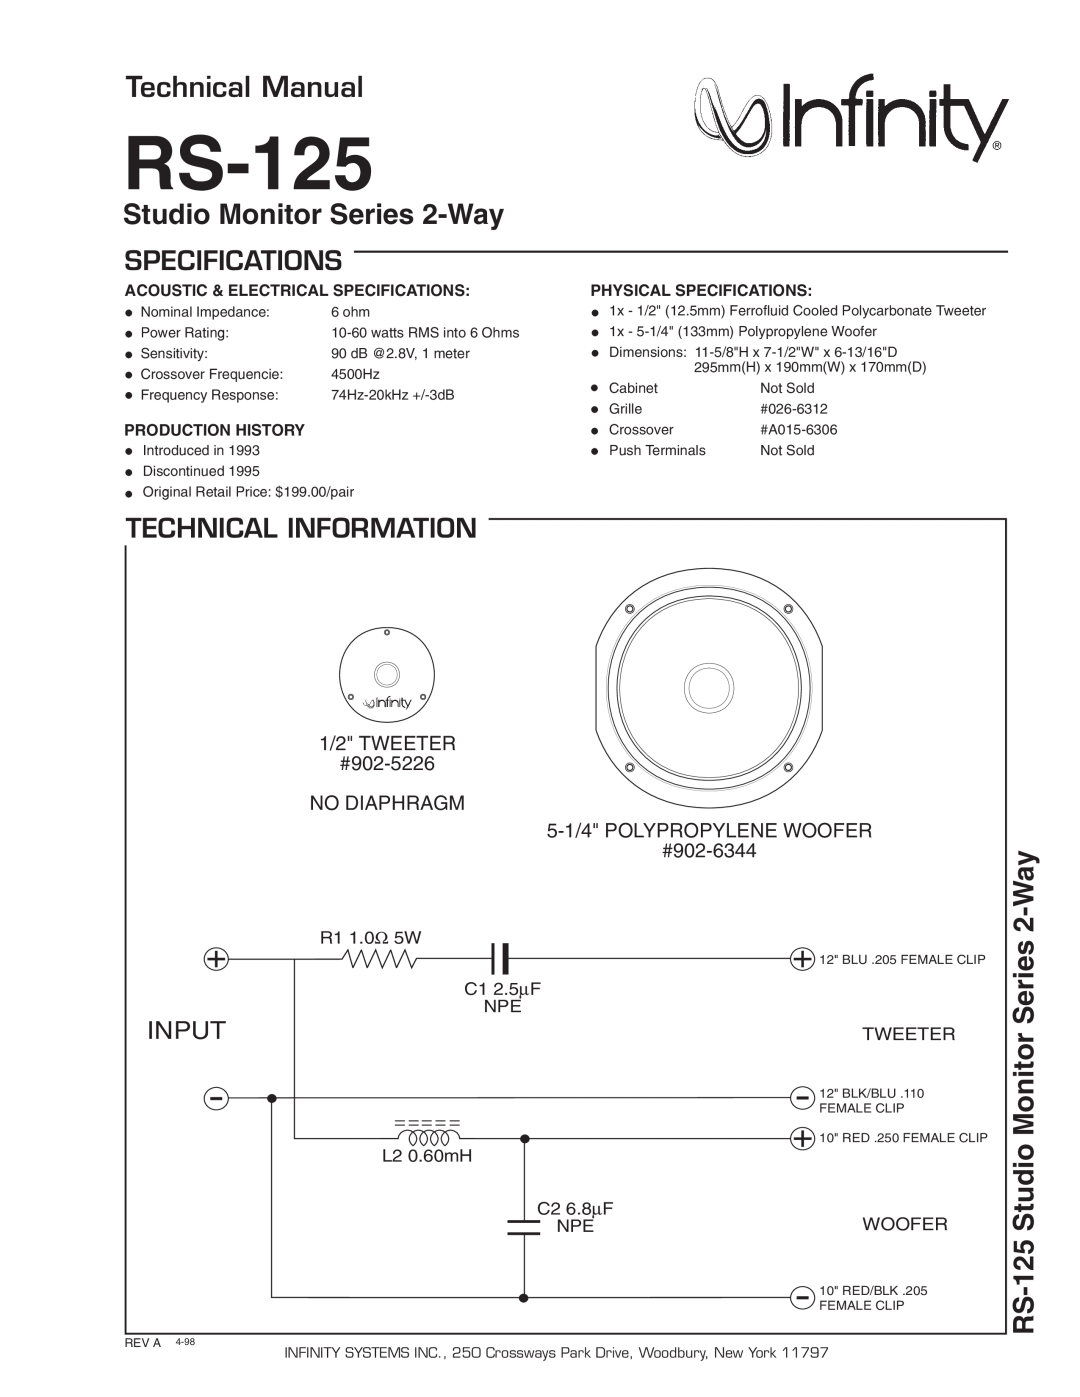 Infinity RS-125 technical manual Technical Manual, Studio Monitor Series 2-Way, Specifications, Technical Information 